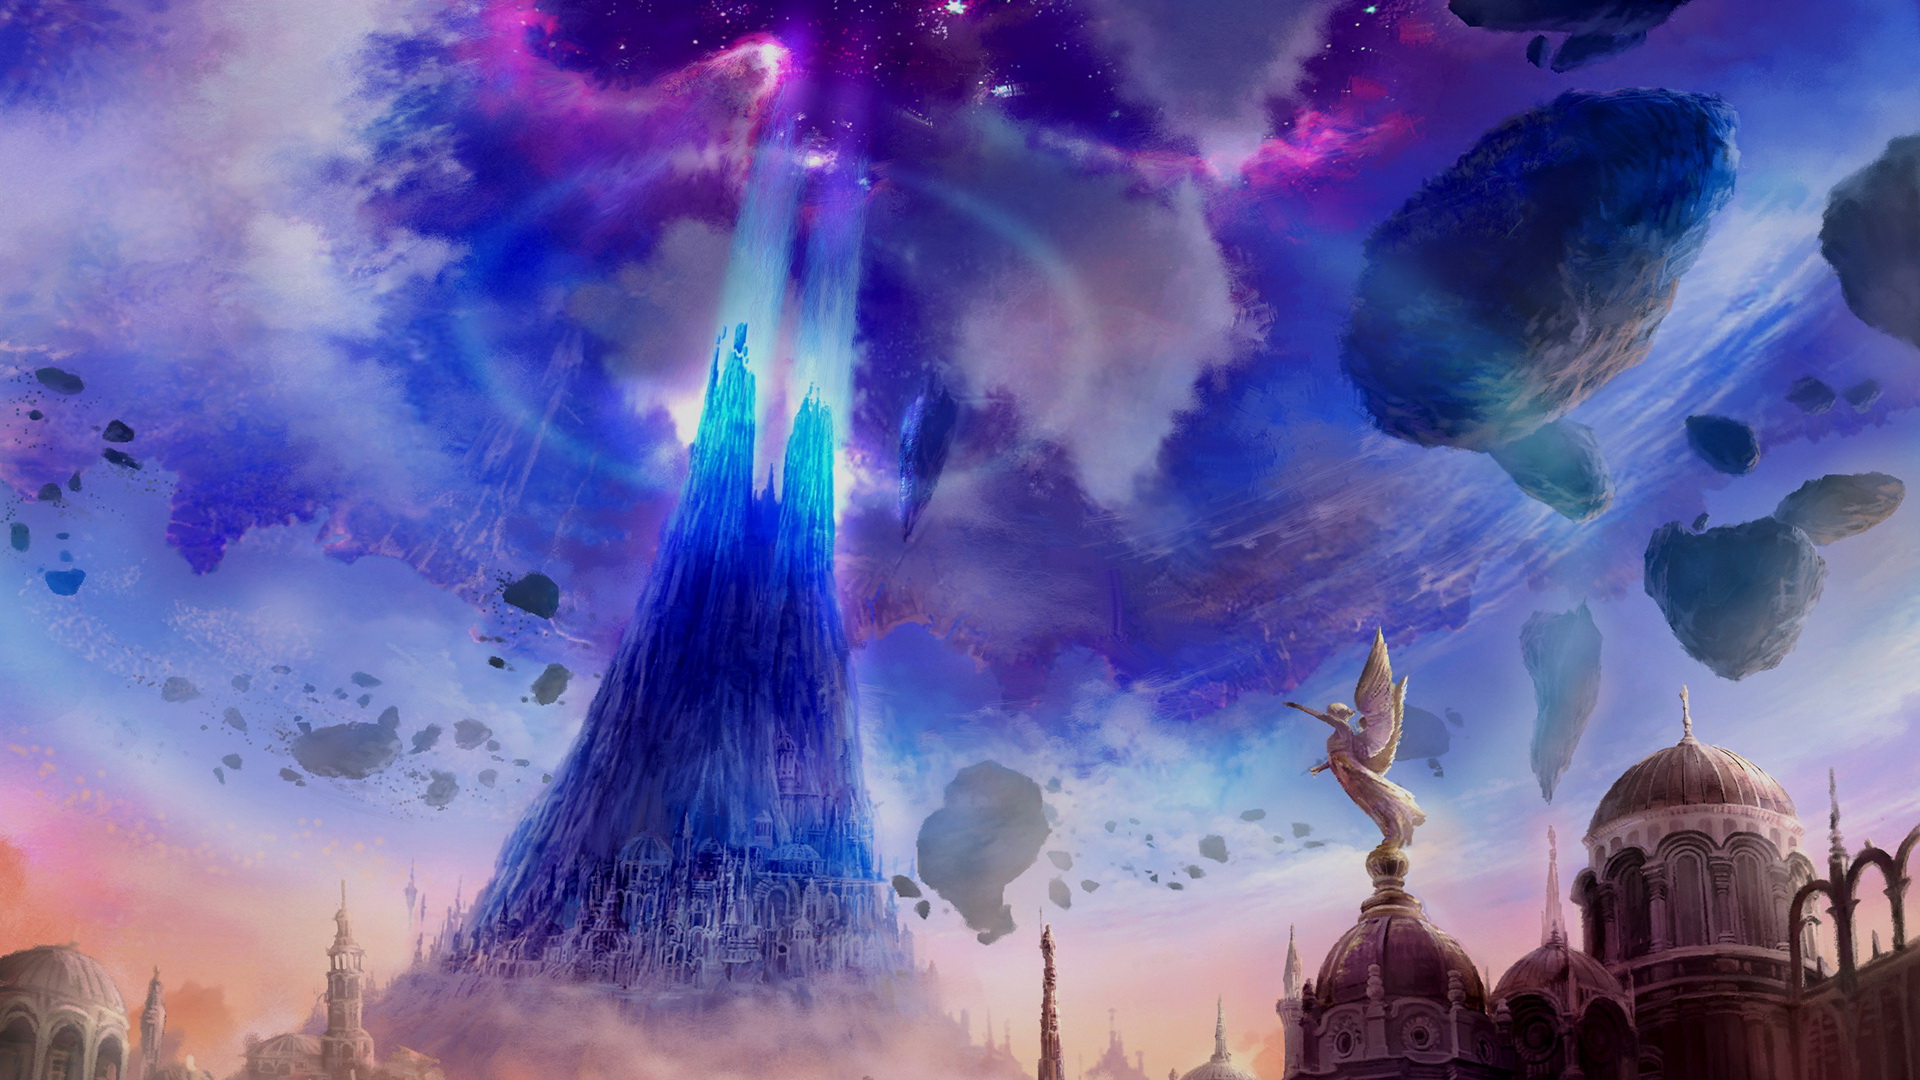 Aion Tower Wallpaper Pc Game HD 1080p